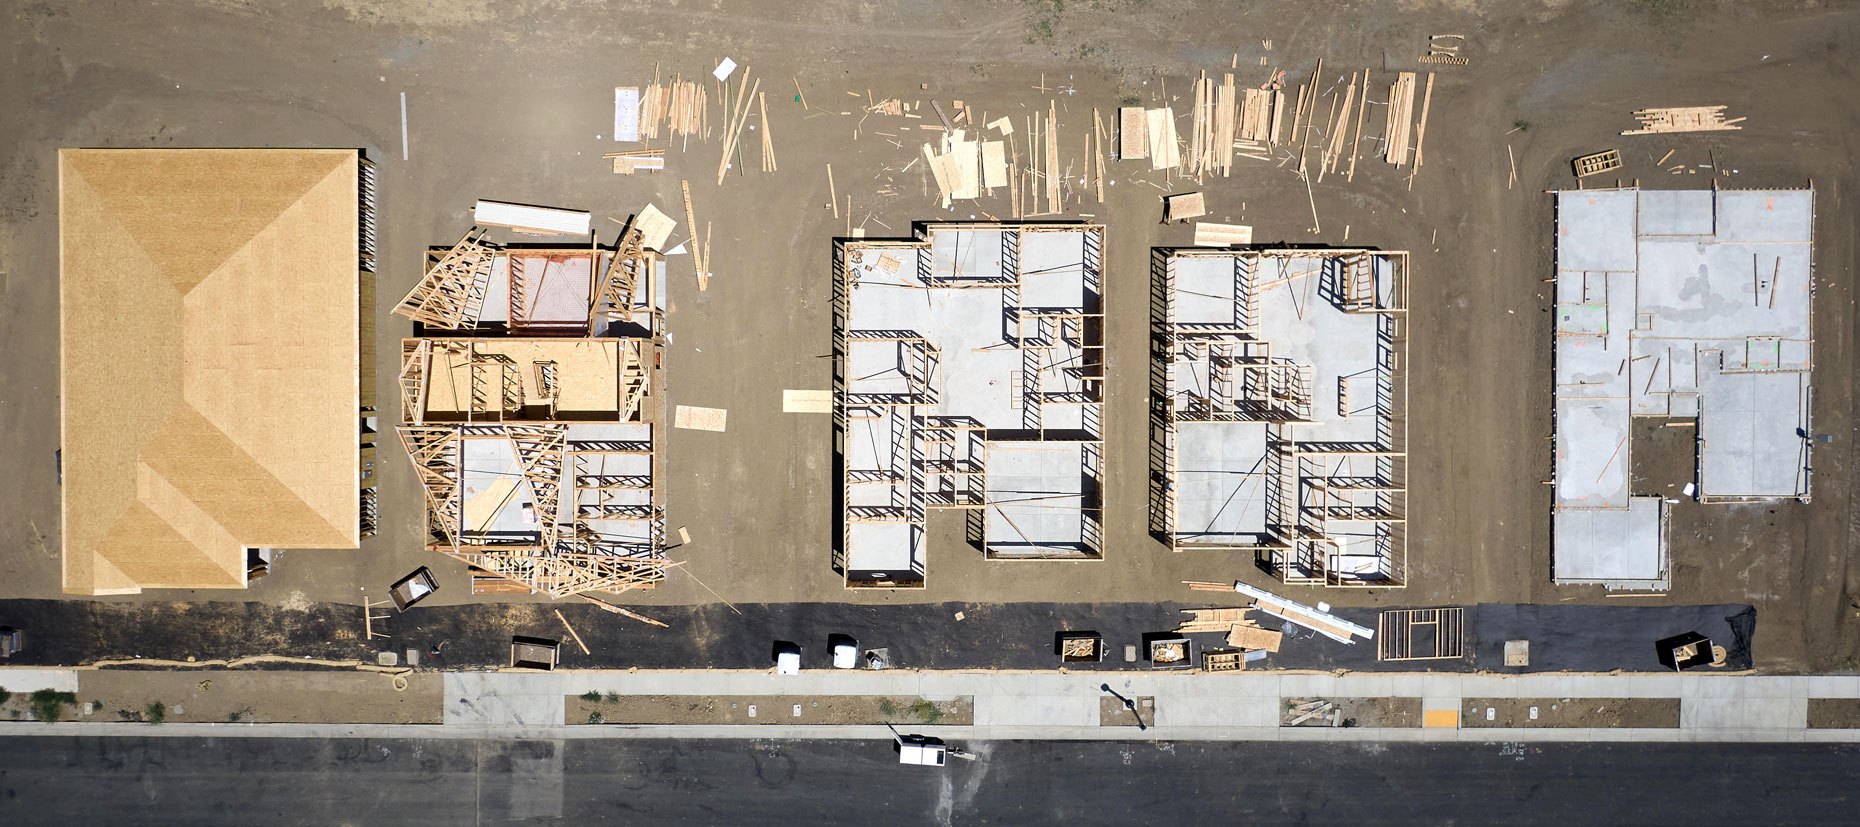 Drone Image of New Homes